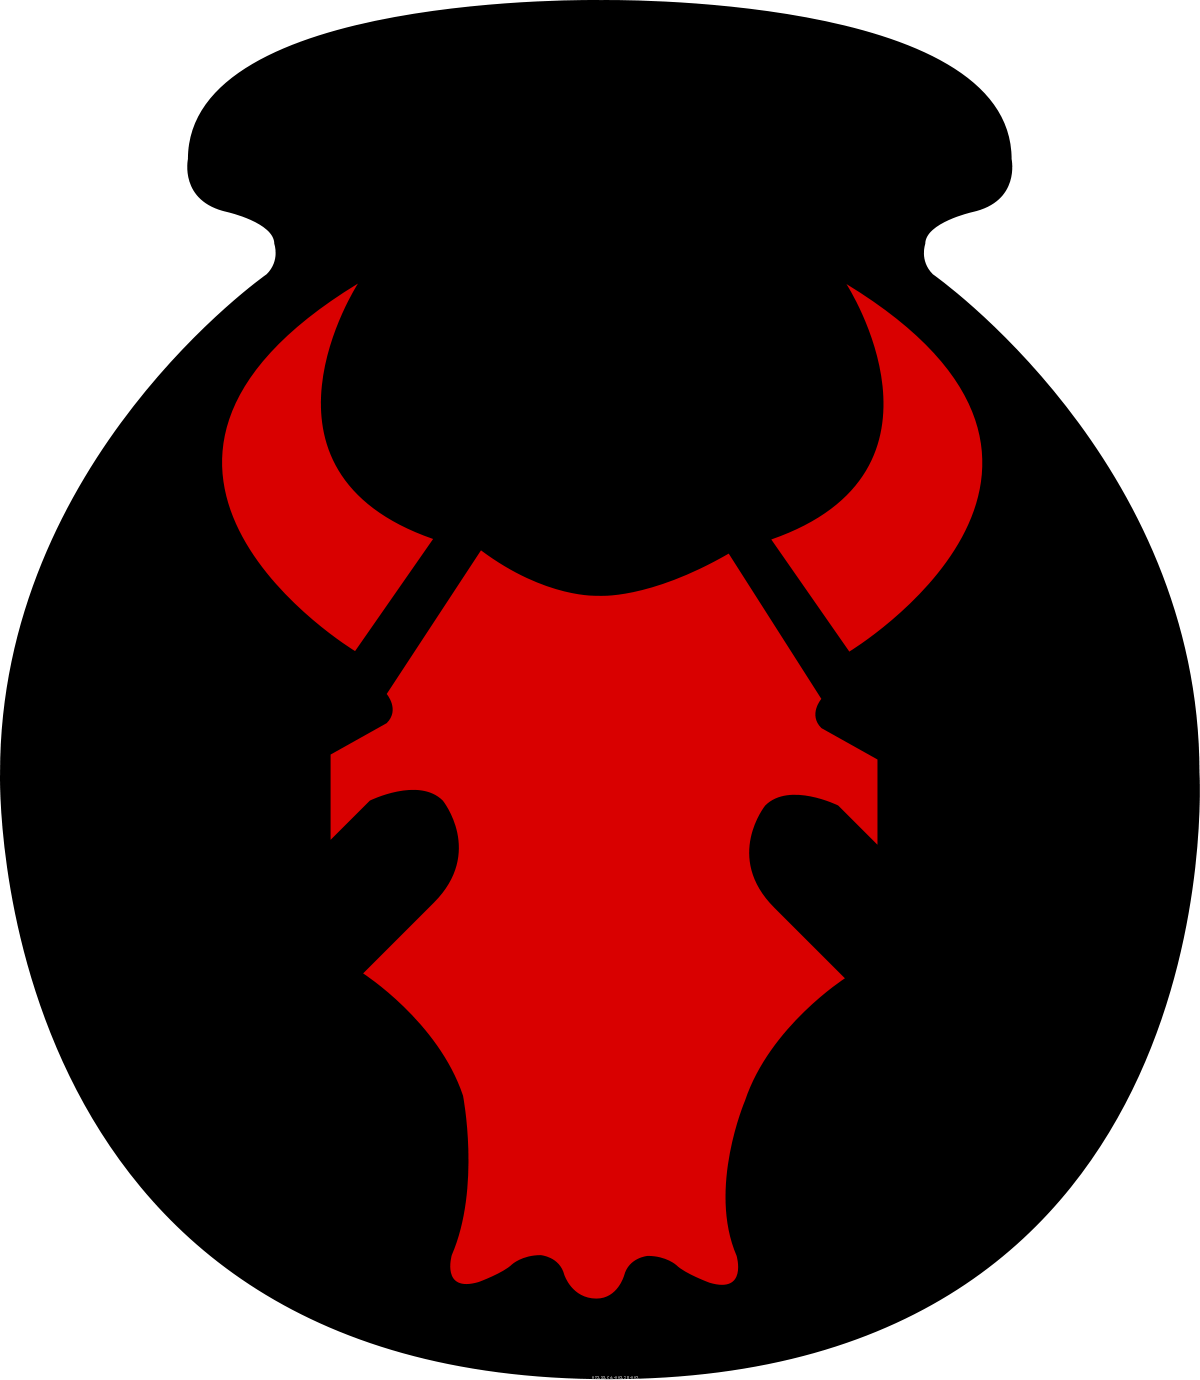 Two Red Bulls Logo - 34th Infantry Division (United States)